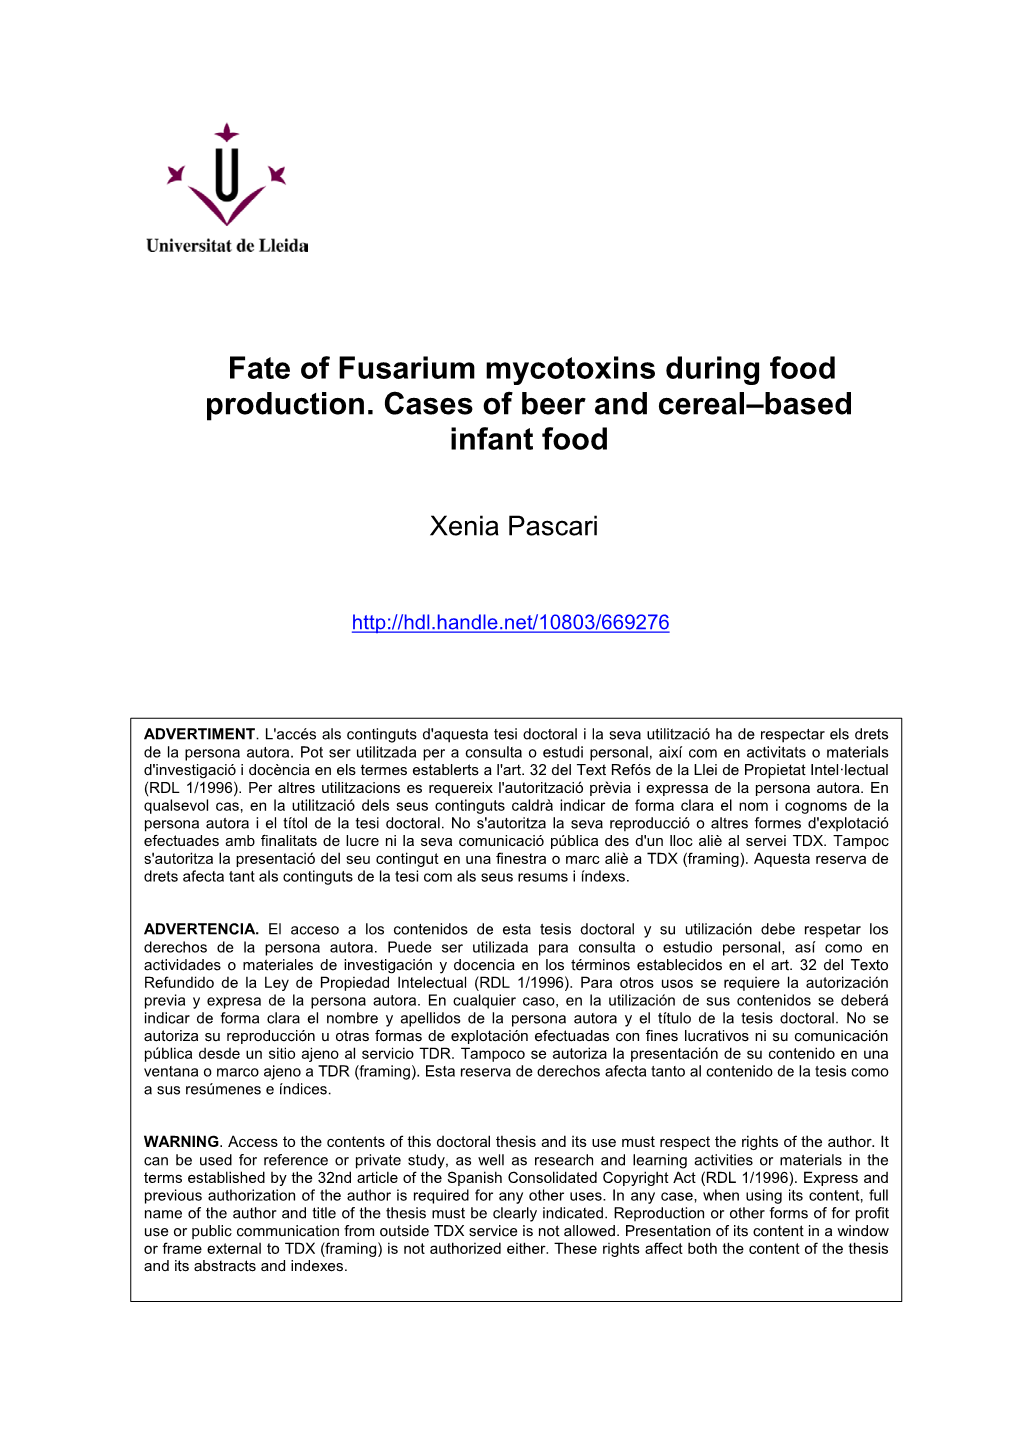 Fate of Fusarium Mycotoxins During Food Production. Cases of Beer and Cereal–Based Infant Food